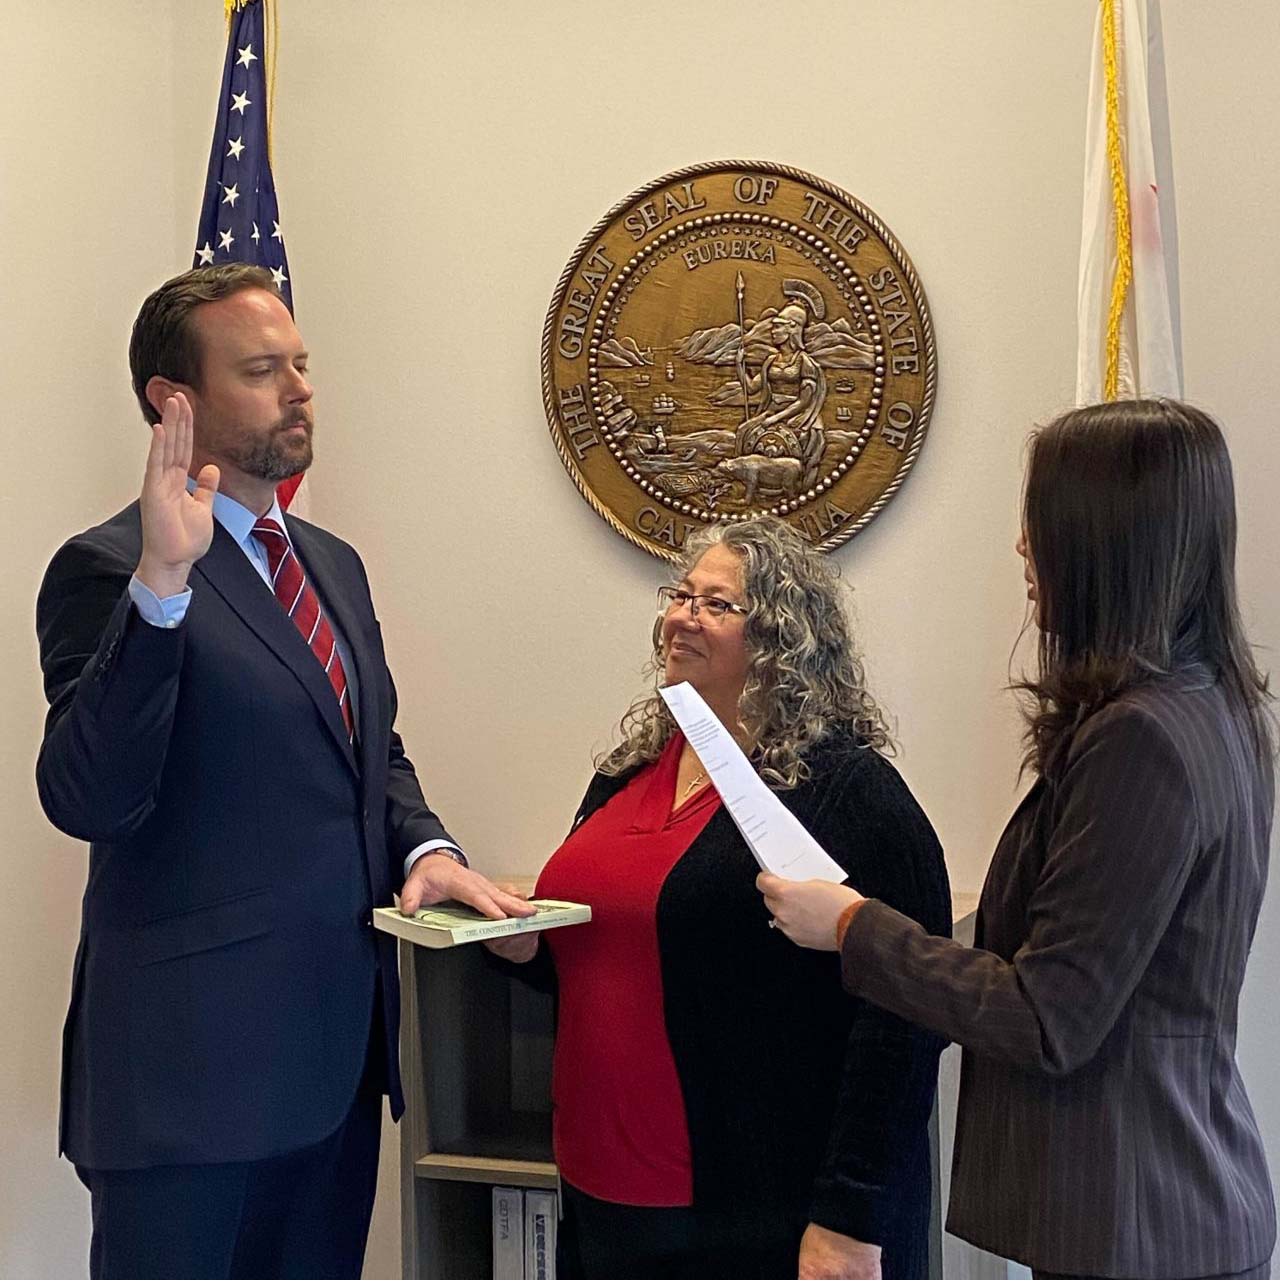 Jeffery Marino is sworn into office as director of the state's Office of Data and Innovation in January by Amy Tong (far right), secretary of the California Government Operations Agency (GovOps), as Miriam Barcellona Ingenito, undersecretary of GovOps, looks on.